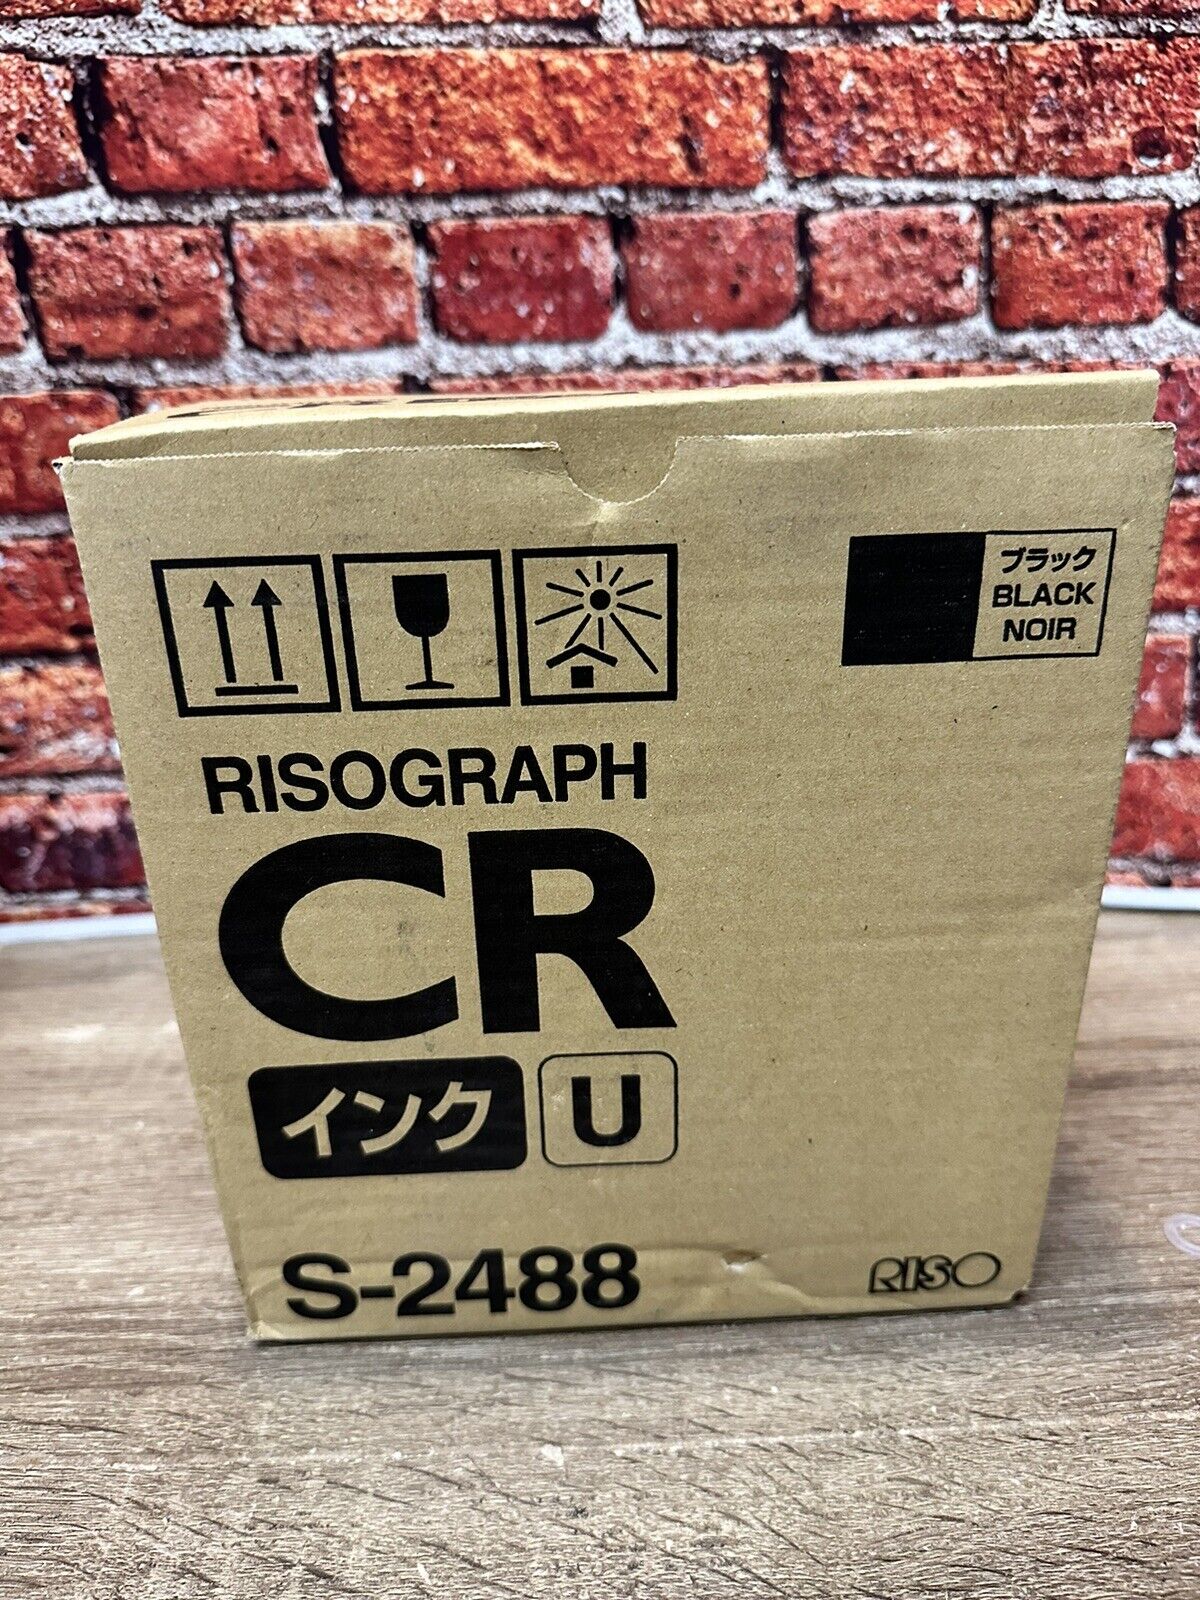 Risograph CR Black Ink S-2488 Pack of 2 Brand New Expired